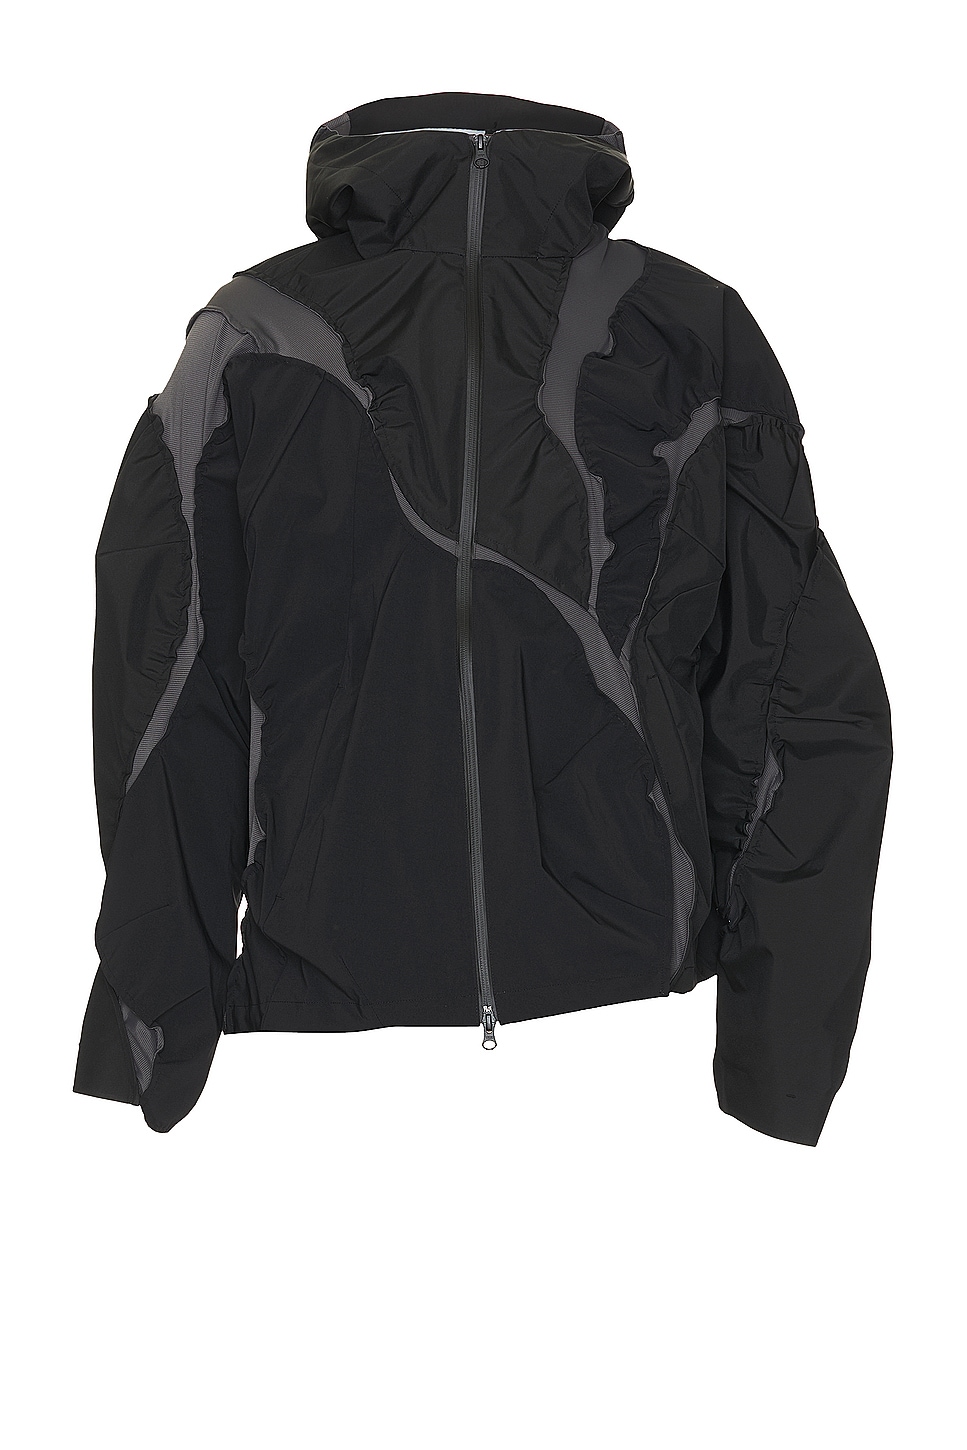 Image 1 of POST ARCHIVE FACTION (PAF) 6.0 Technical Jacket in Black